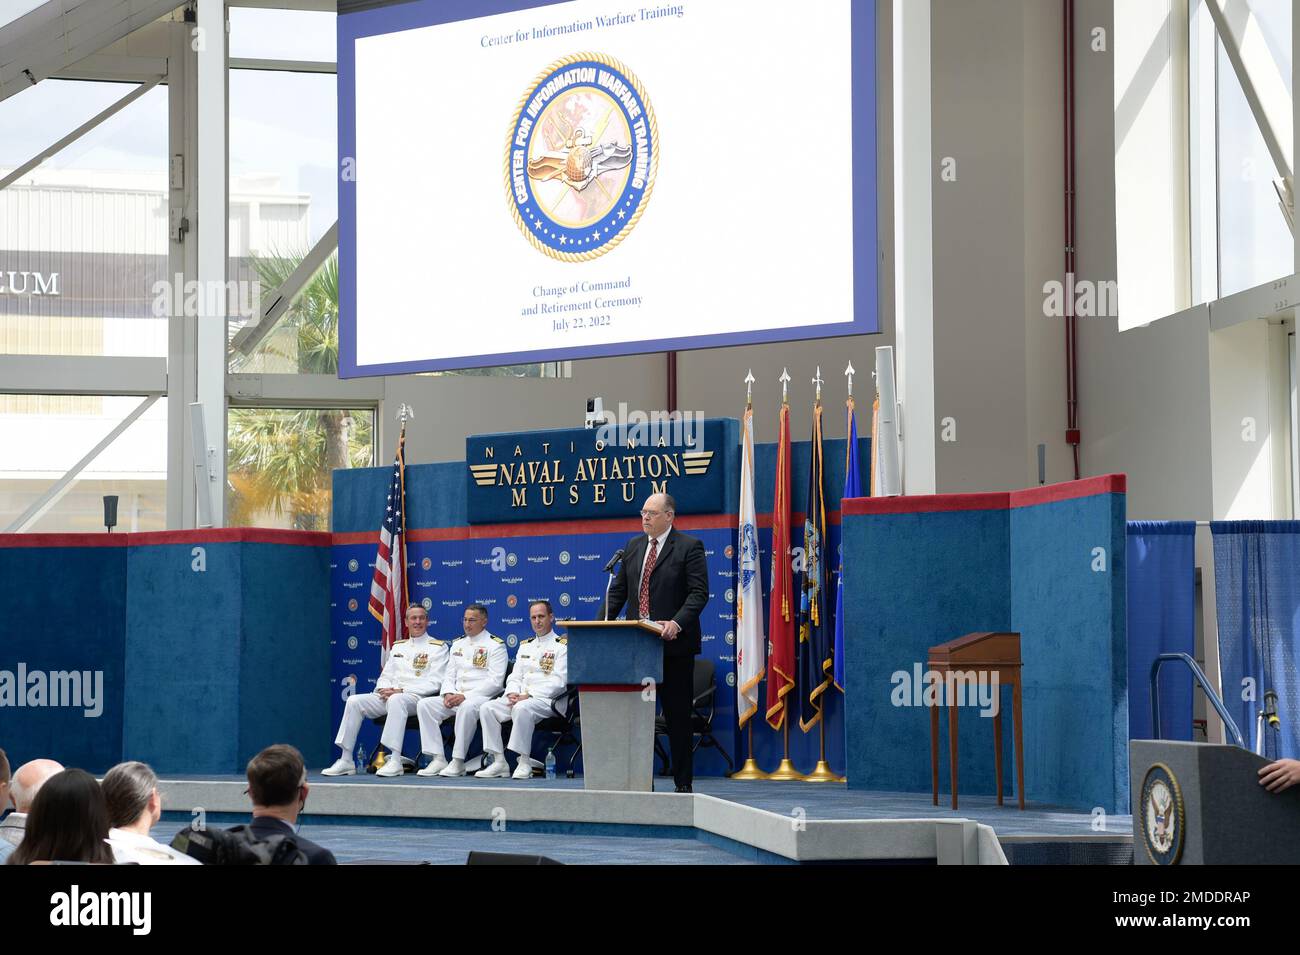 Retired Rear Adm. Steve L. Parode, a longstanding leader in the information warfare community, provides remarks as the guest speaker during the Center for Information Warfare Training (CIWT) change of command ceremony at the National Naval Aviation Museum, July 22, 2022.  Capt. Christopher G. Bryant relieved Capt. Marc W. Ratkus as CIWT’s commanding officer, while Ratkus also retired, concluding a 39-year military career. CIWT is charged with developing the future technical cadre of the Navy’s information warfare community. Stock Photo